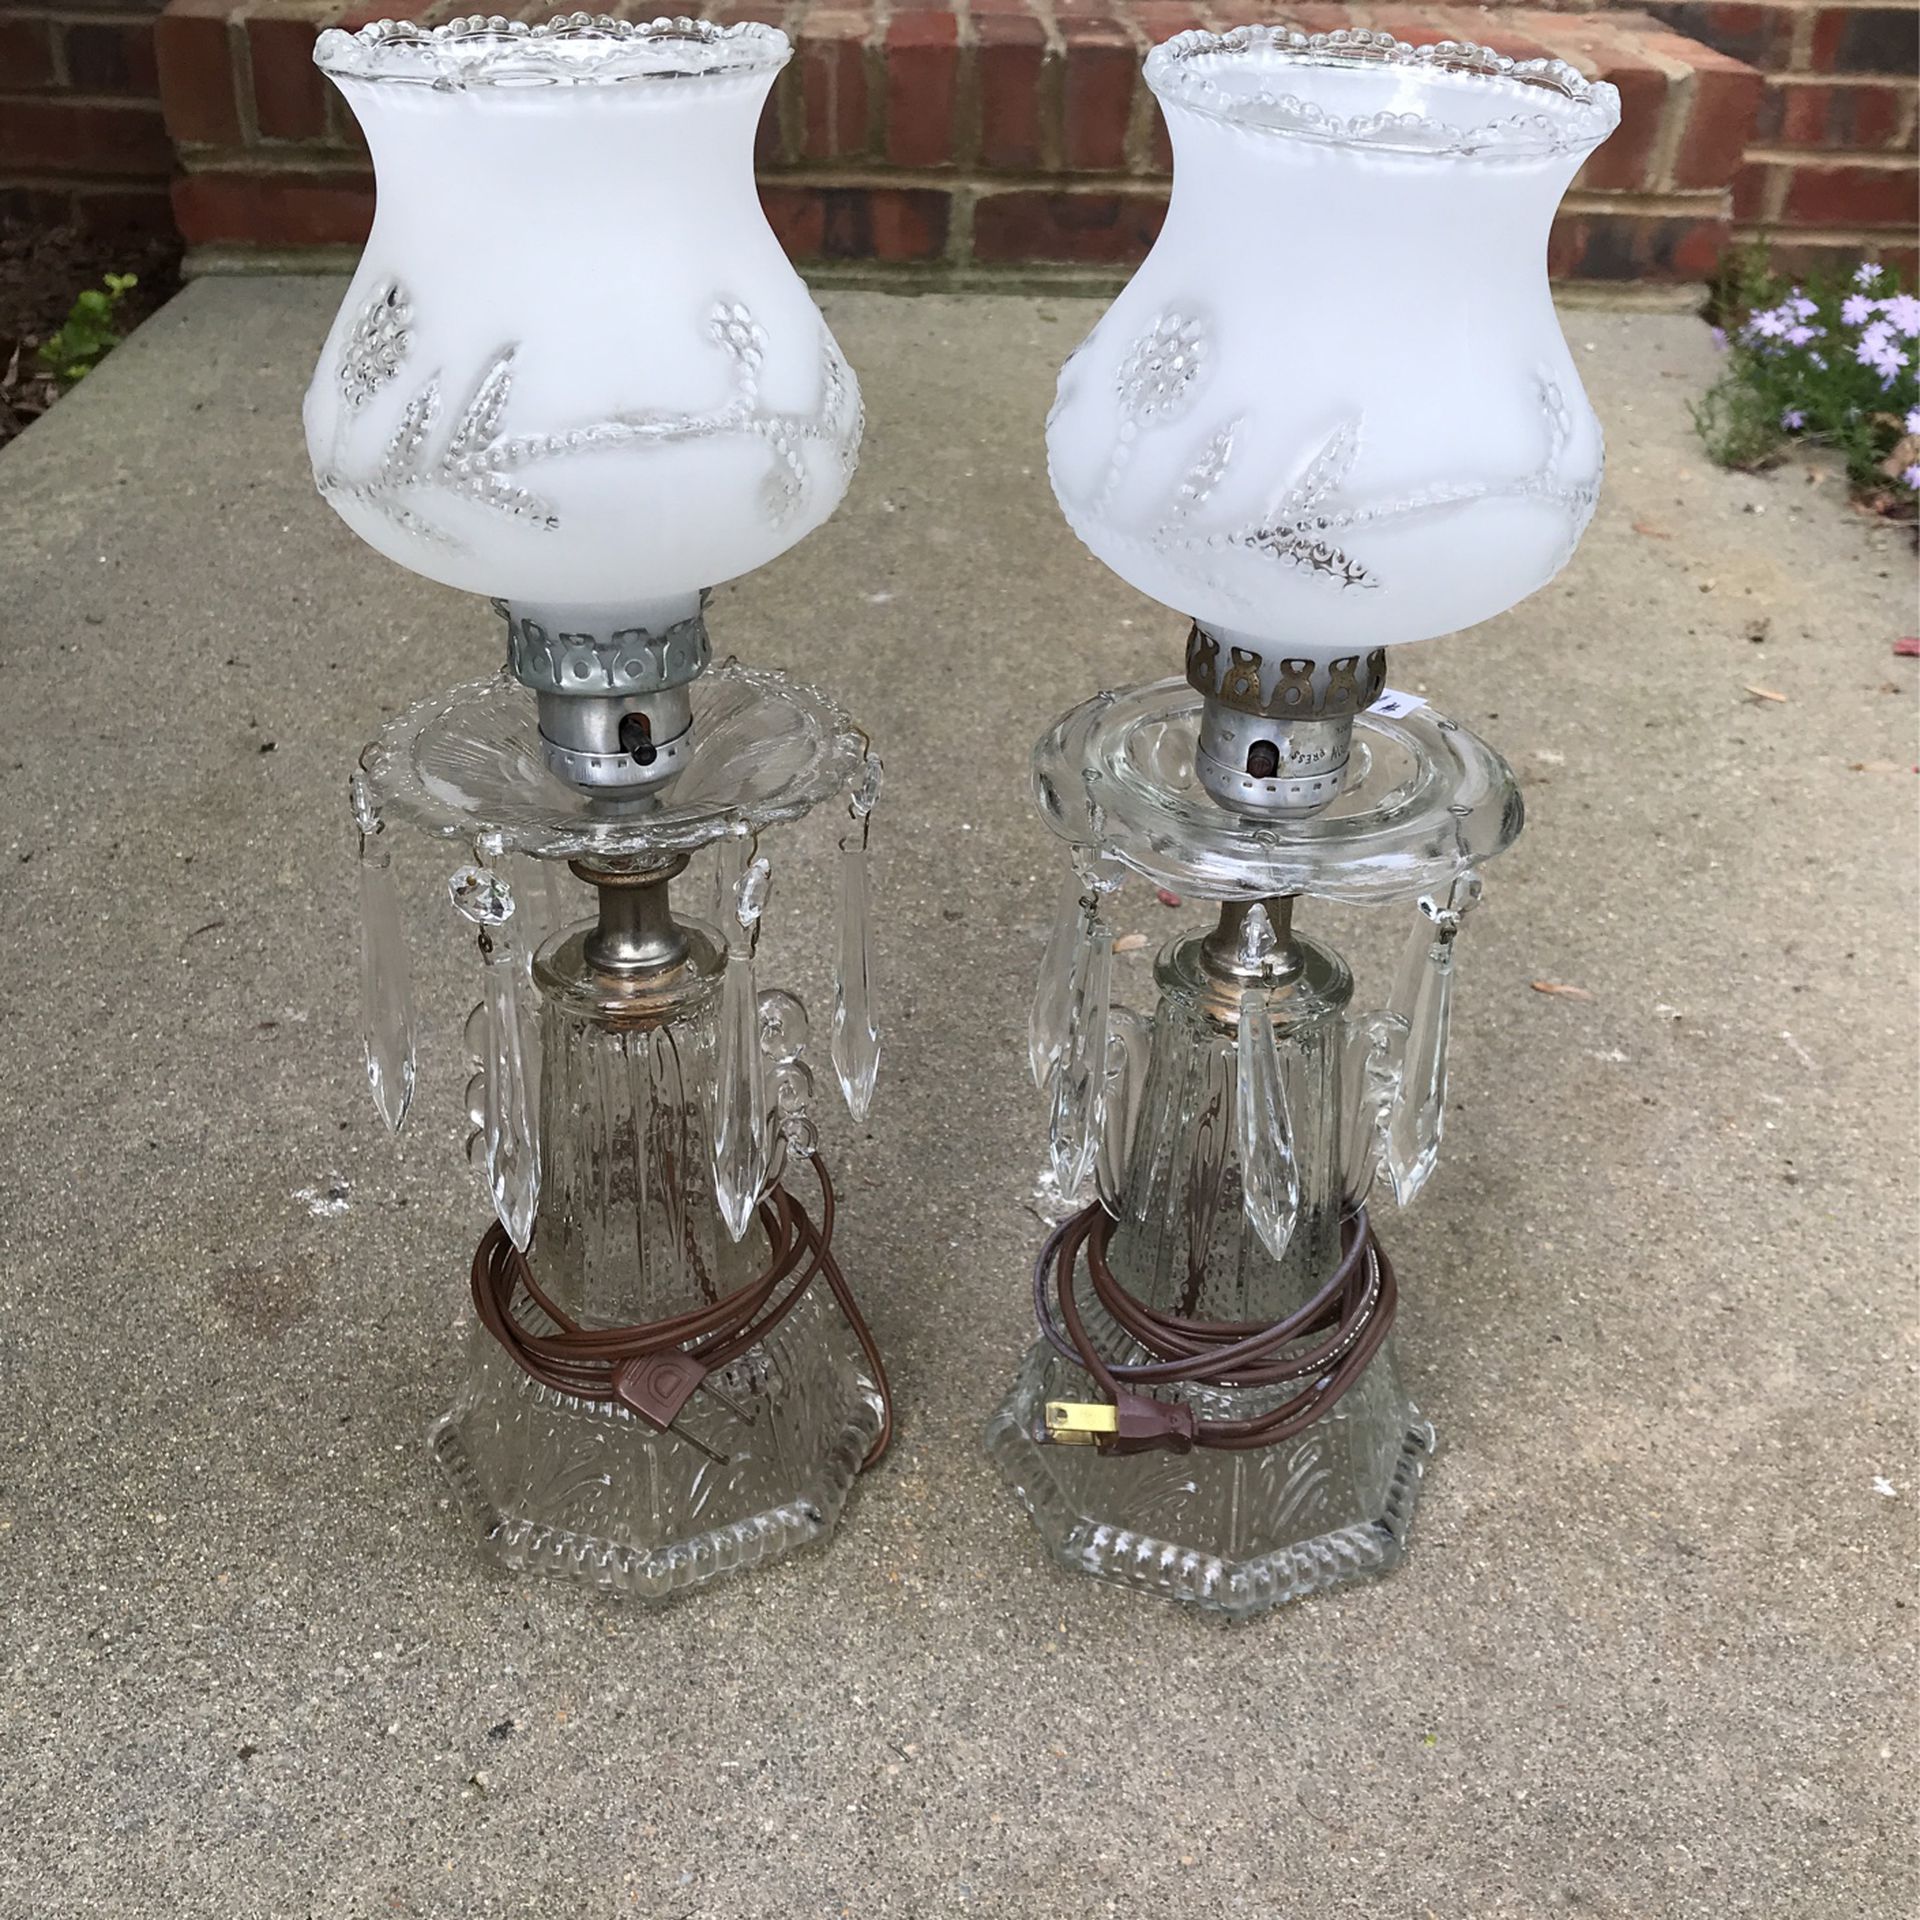 2 Nearly Identical Antique Boudoir Lamps